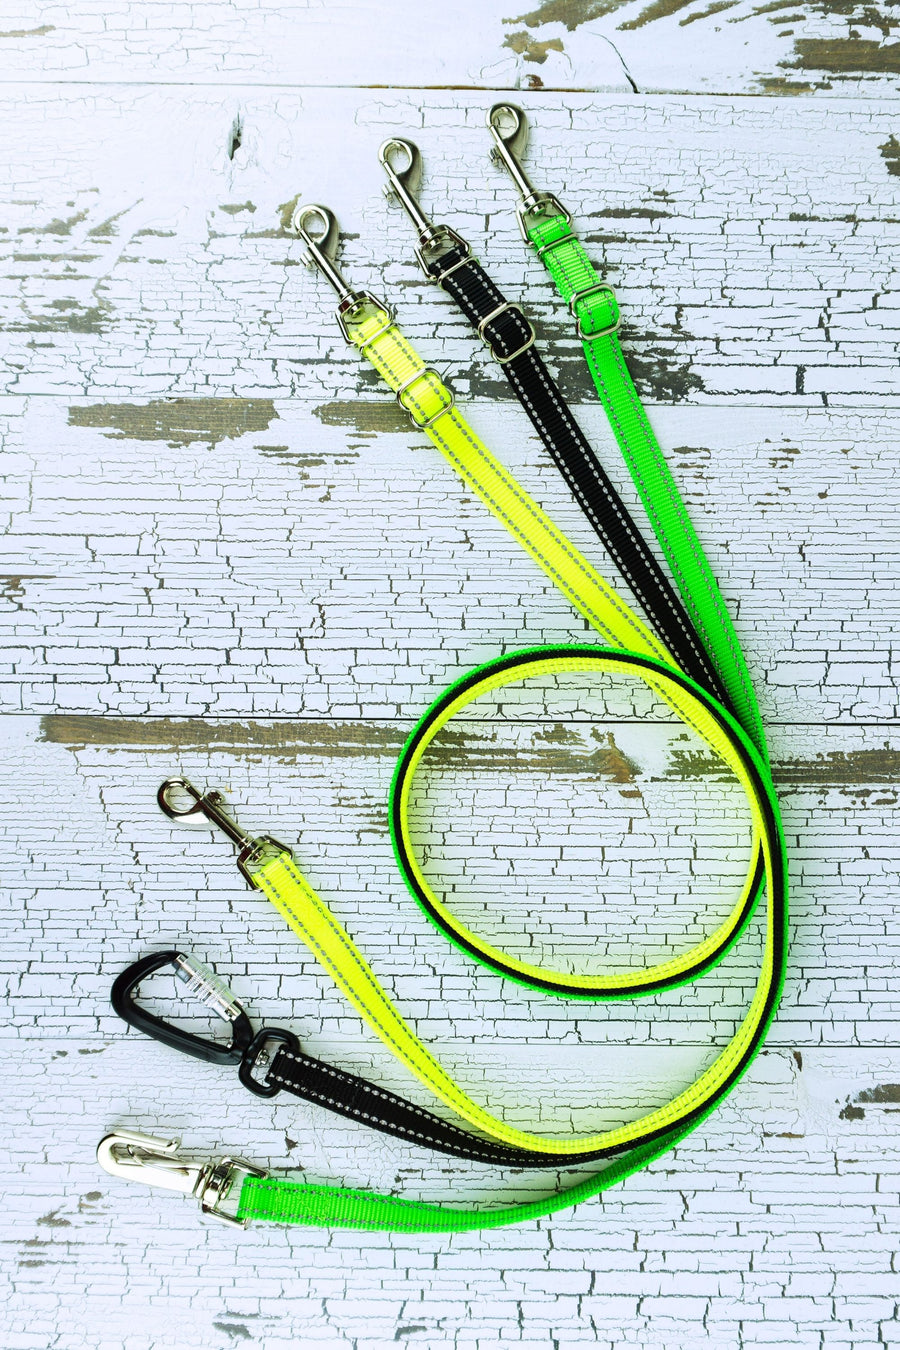 Reflective adjustable length hands free leashes for small dog shown in a swirl lay with neon yellow, black, and neon green leashes with a variety of hardware.